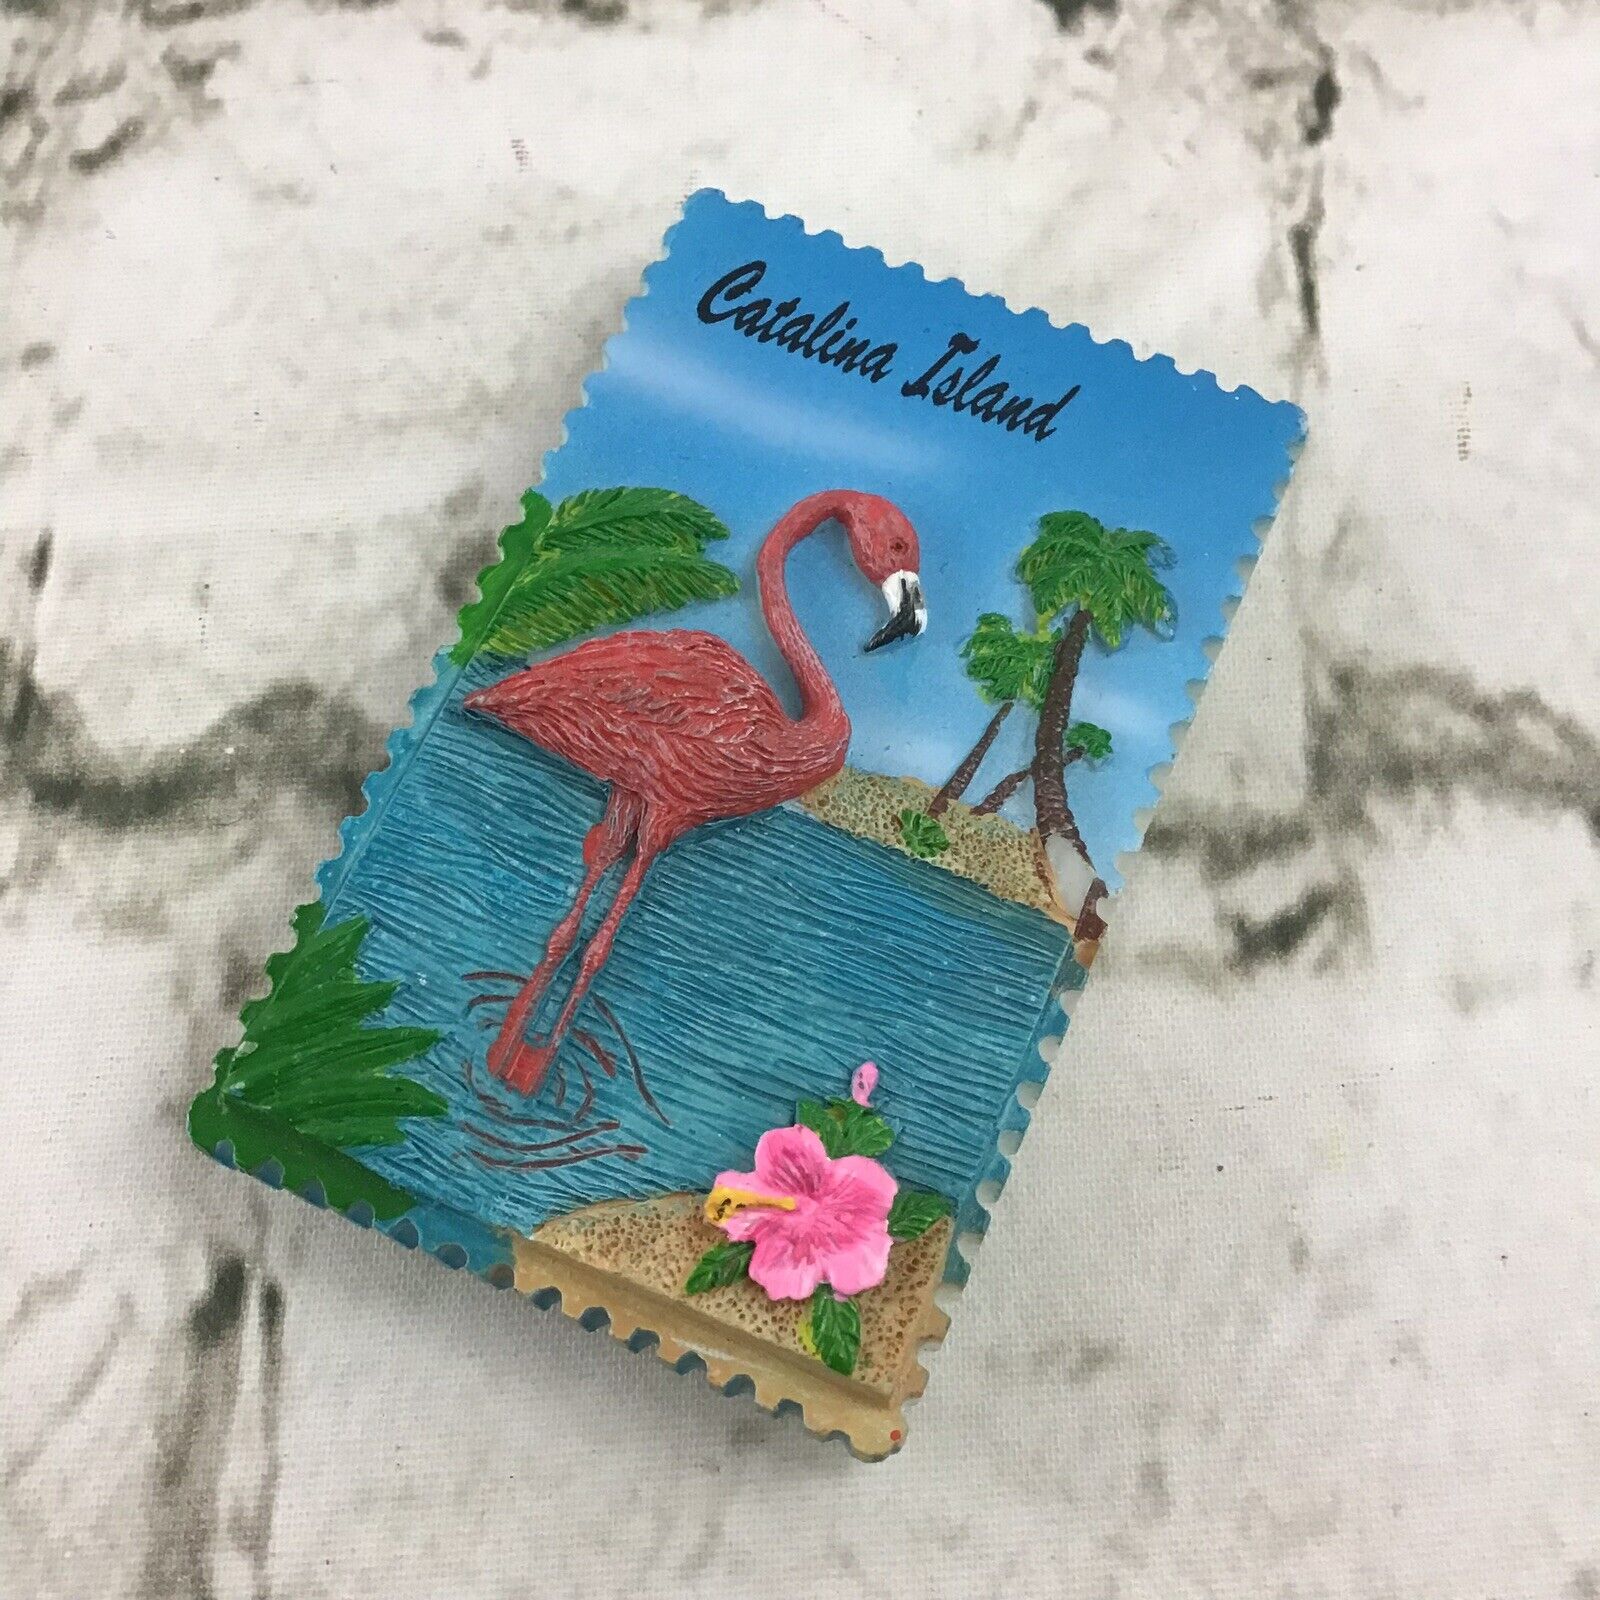 Catalina Island Pink Flamingo Refrigerator Magnet Travel Collectible Flaw